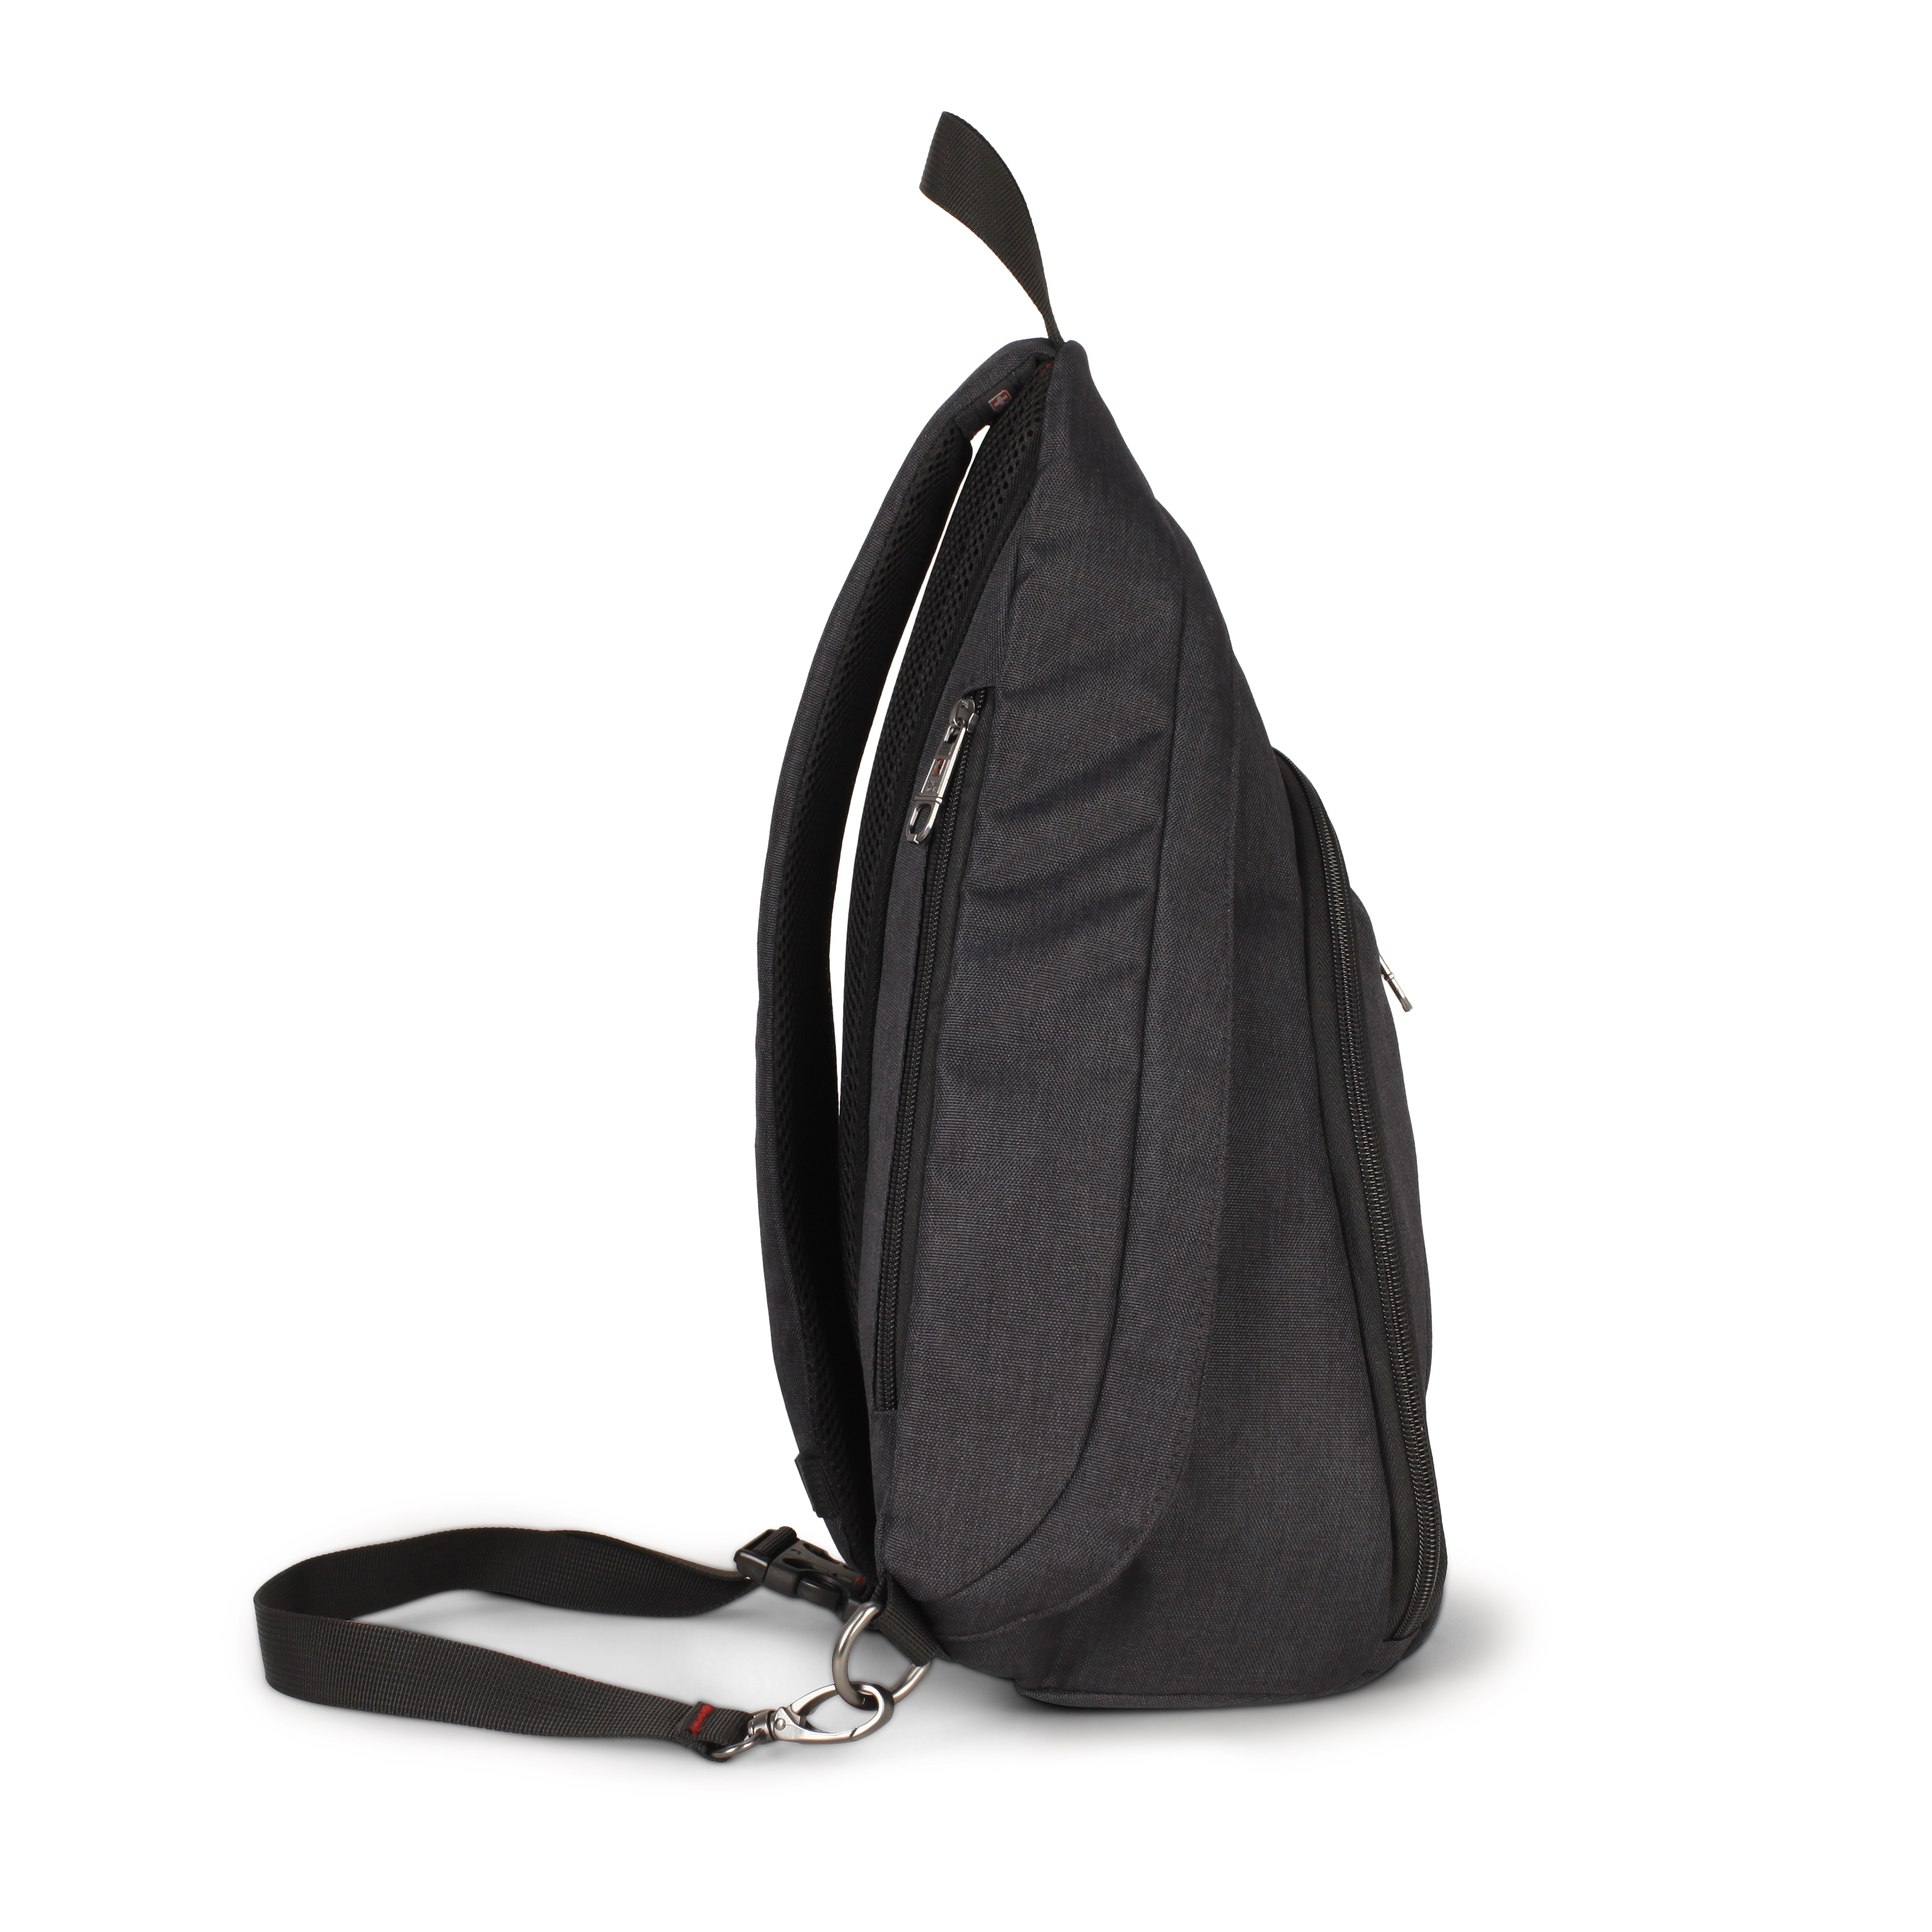 SwissTech Travel Sling Backpack, Black (All Ages) (Walmart Exclusive) - image 4 of 10